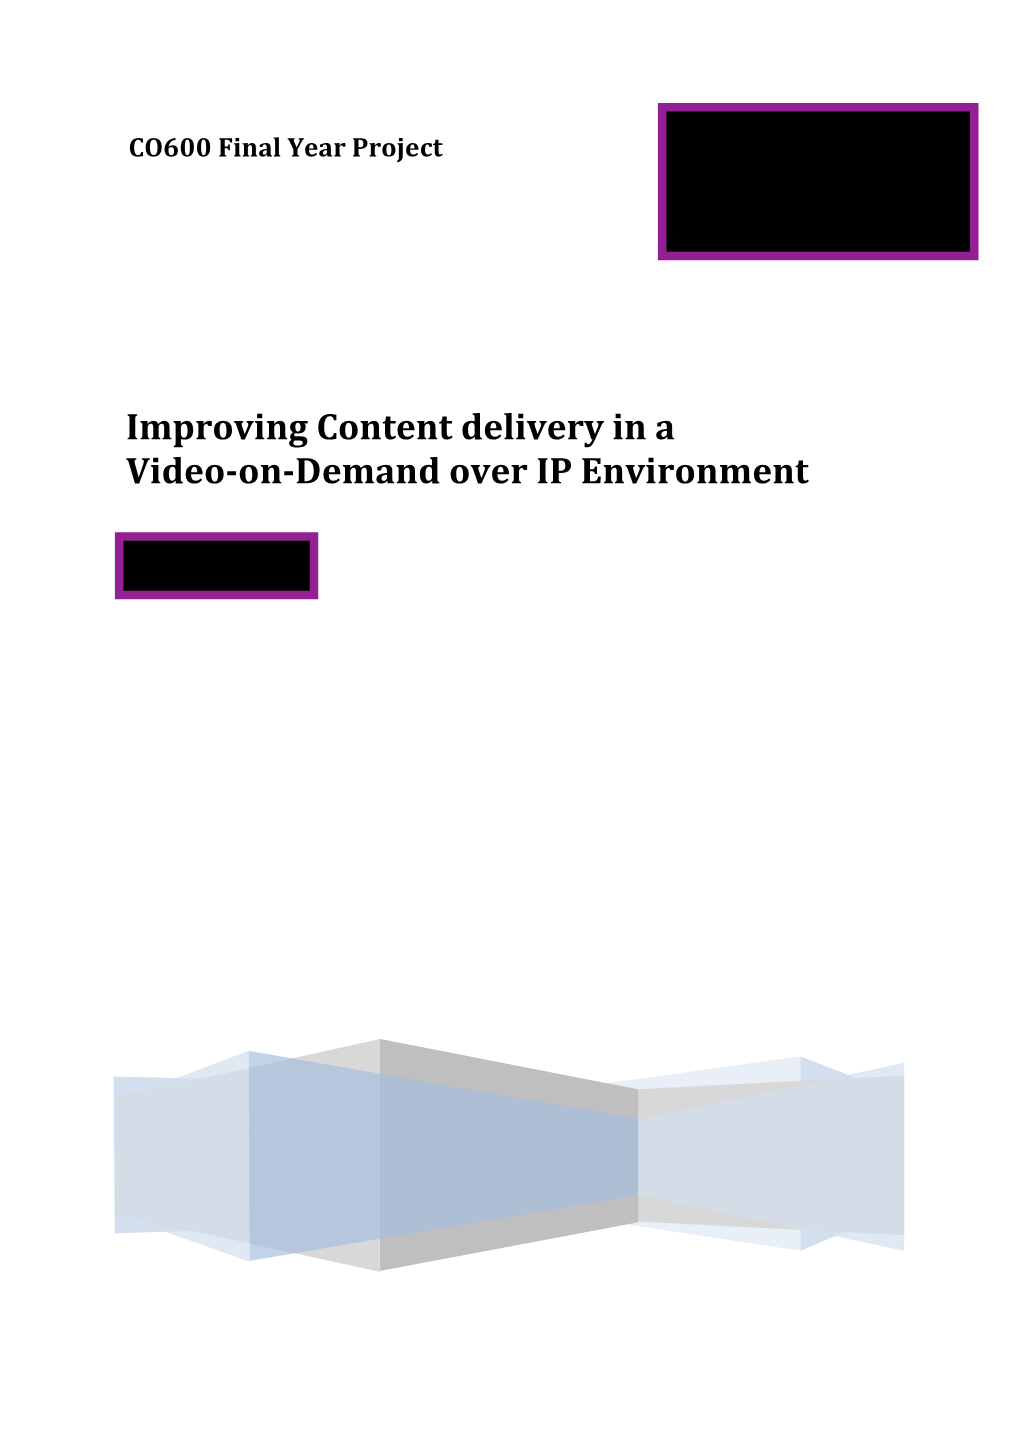 Improving Content Delivery in a Video-On-Demand Over IP Environment